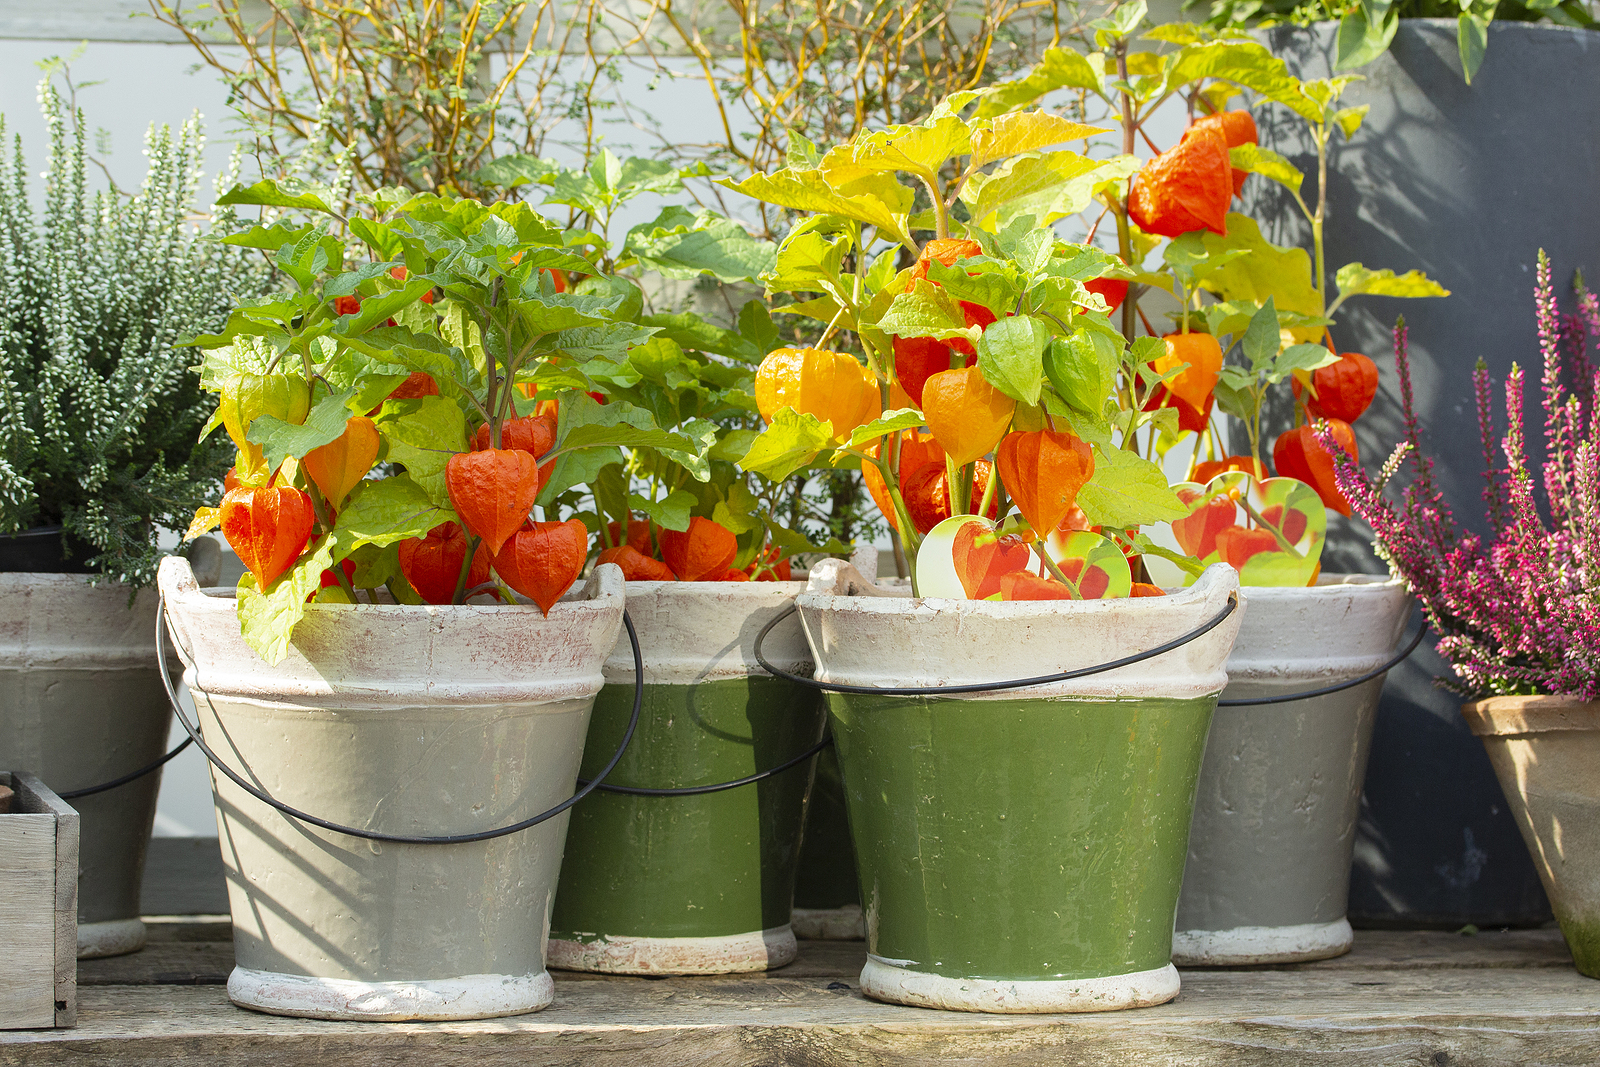 Bucket Planter Gardening - How To Grow Flowers & Vegetables With Ease